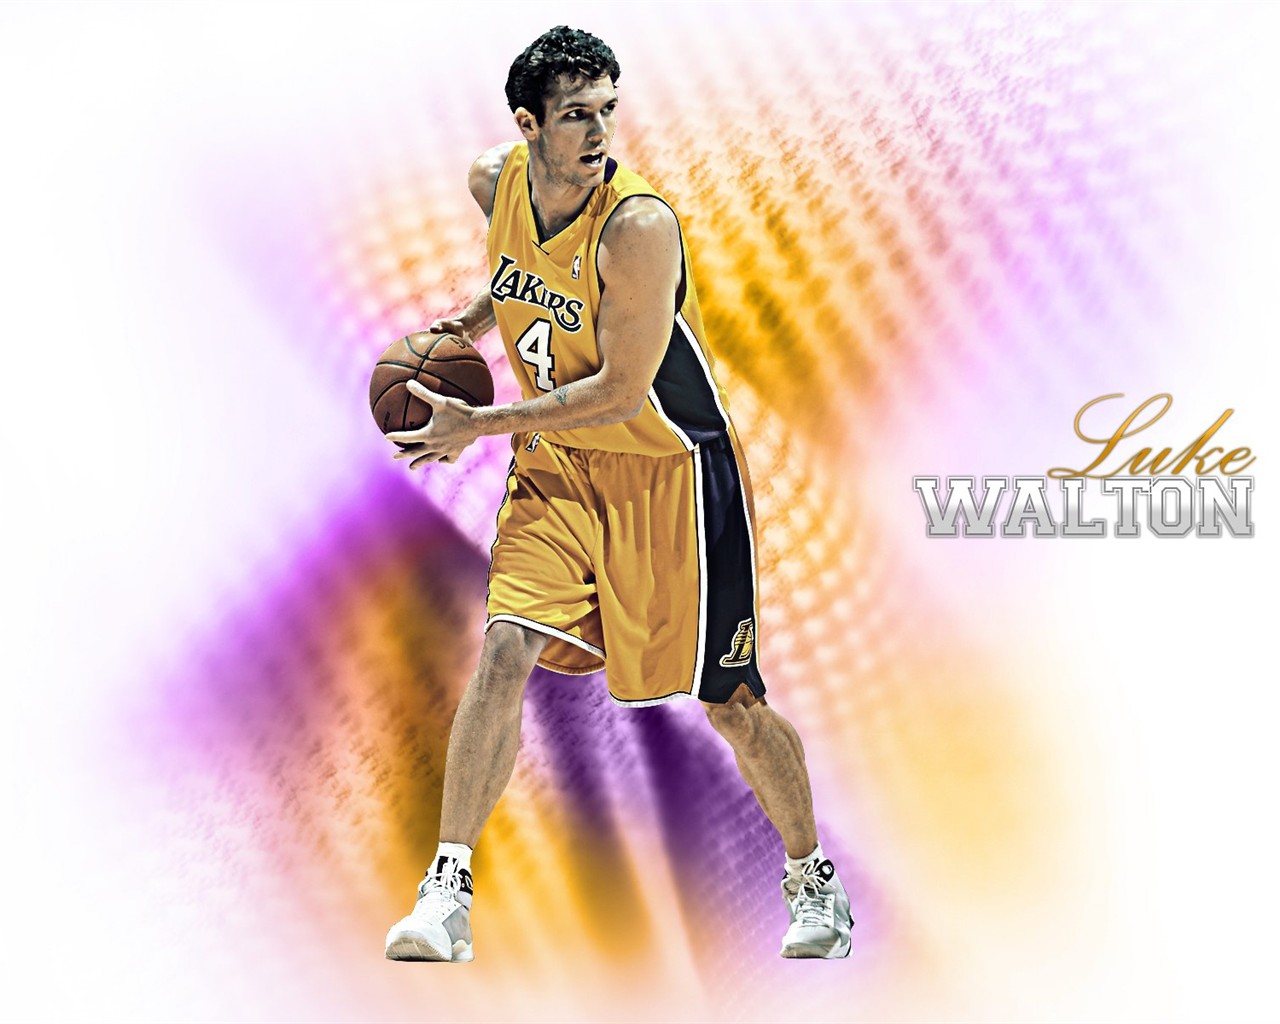 Los Angeles Lakers Wallpaper Oficial #19 - 1280x1024